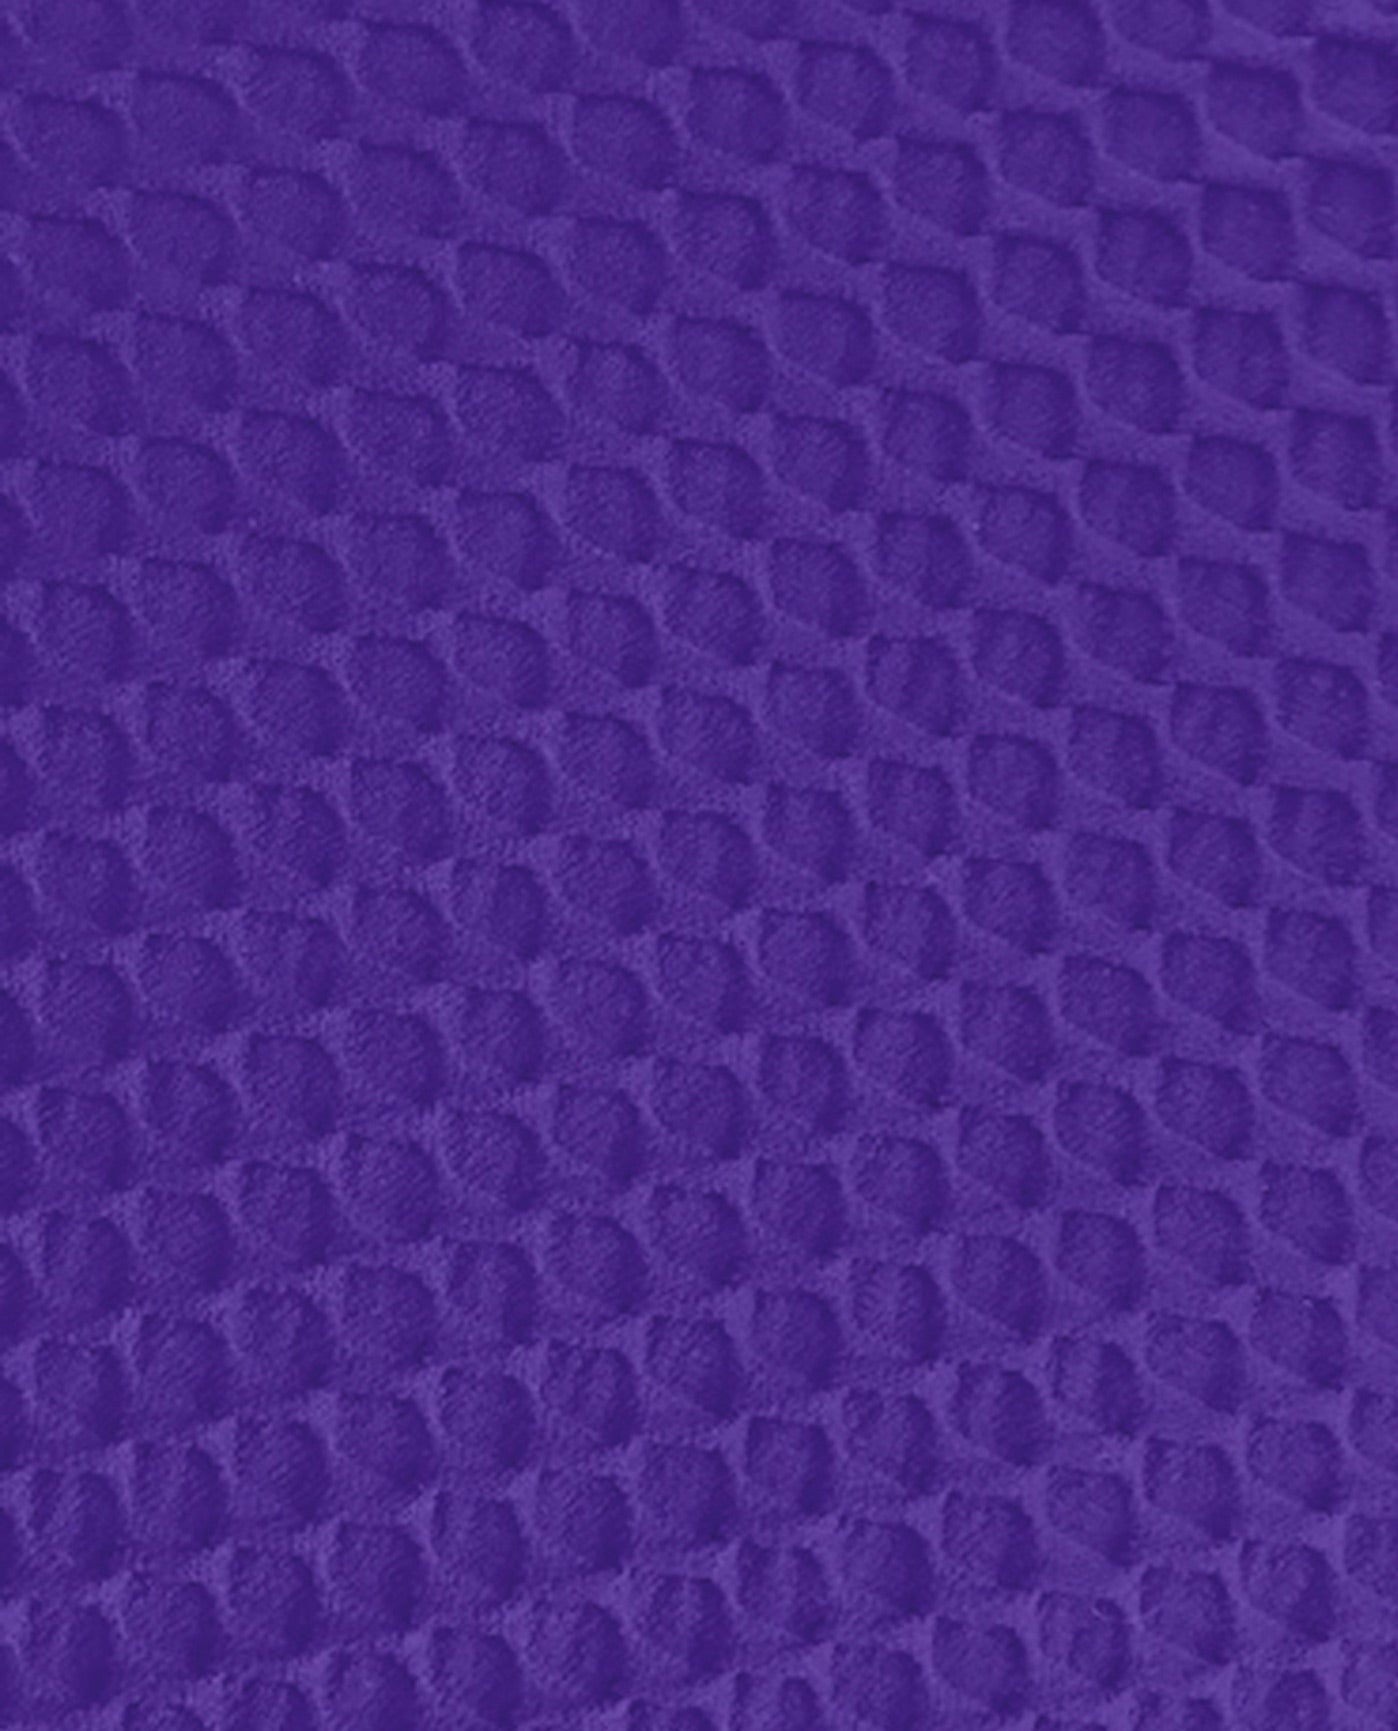 FABRIC SWATCH VIEW OF CHLORINE RESISTANT AQUAMORE COLOR BLOCK TEXTURED SPORTY ONE PIECE SWIMSUIT | 618 AQT TEXTURED PURPLE